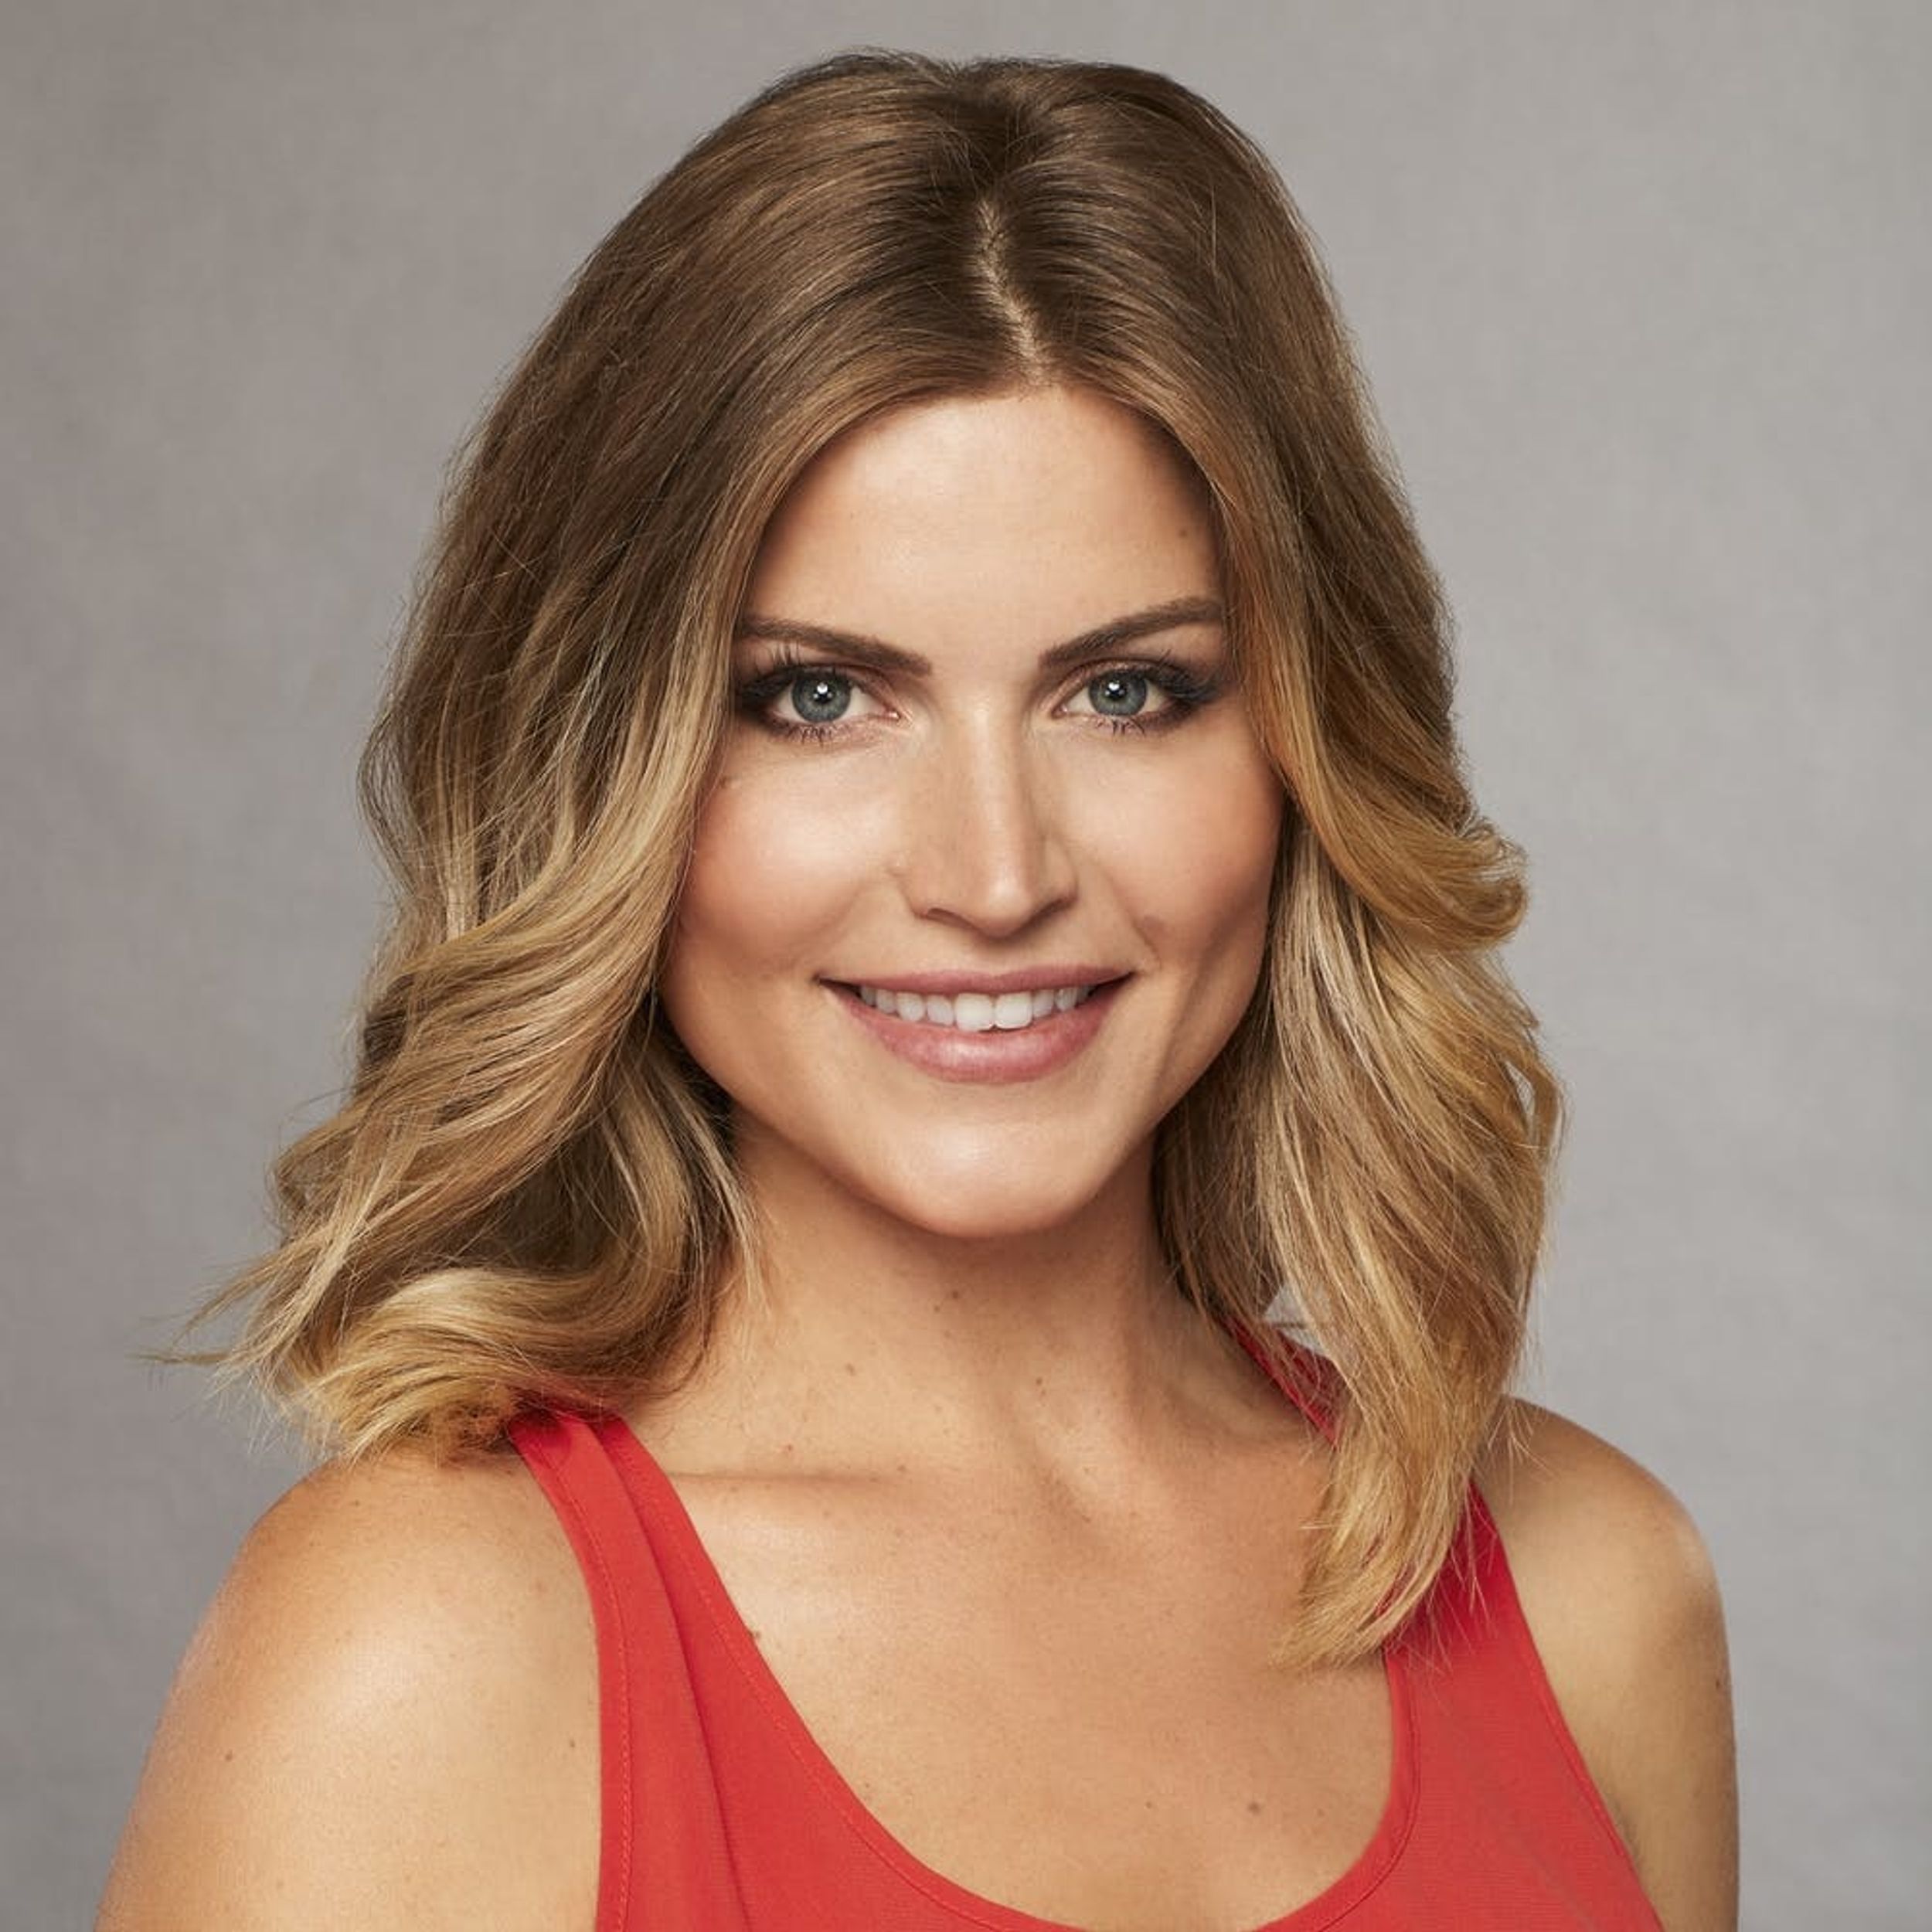 We Shouldn’t Be So Quick to Call This ‘Bachelor’ Contestant a Villain